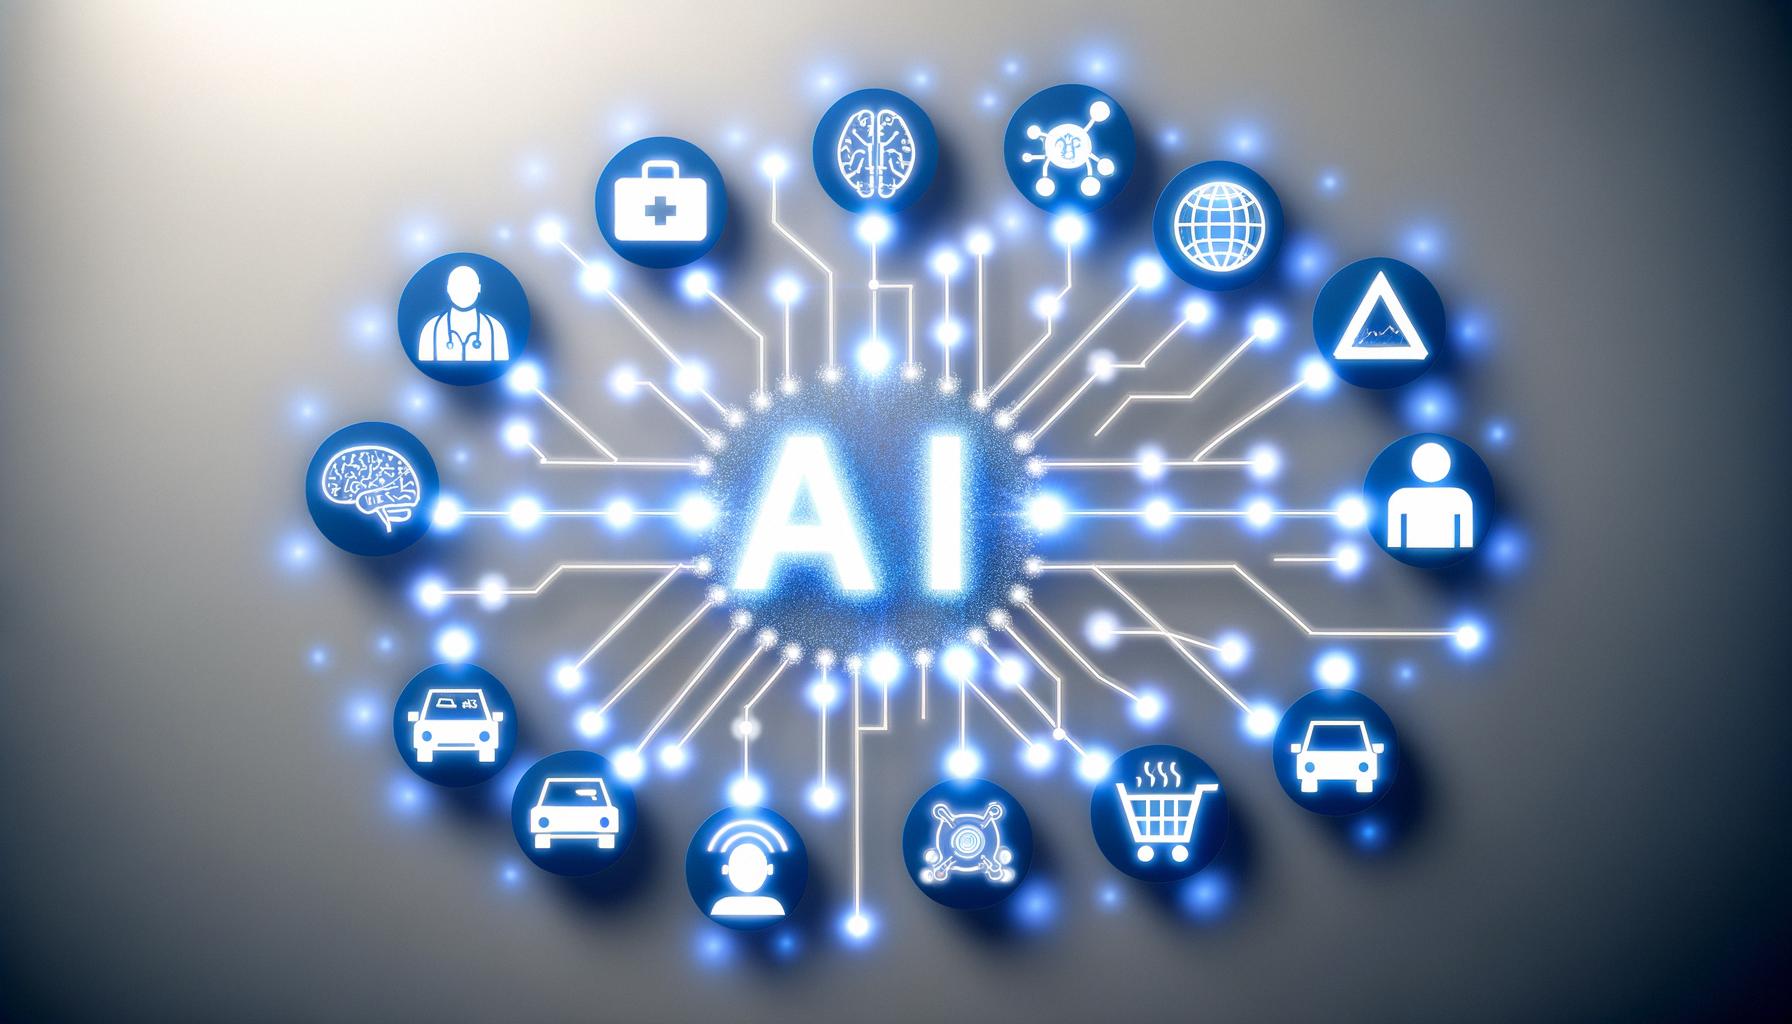 AI integration is transforming industries across corporate, military, and academic sectors.